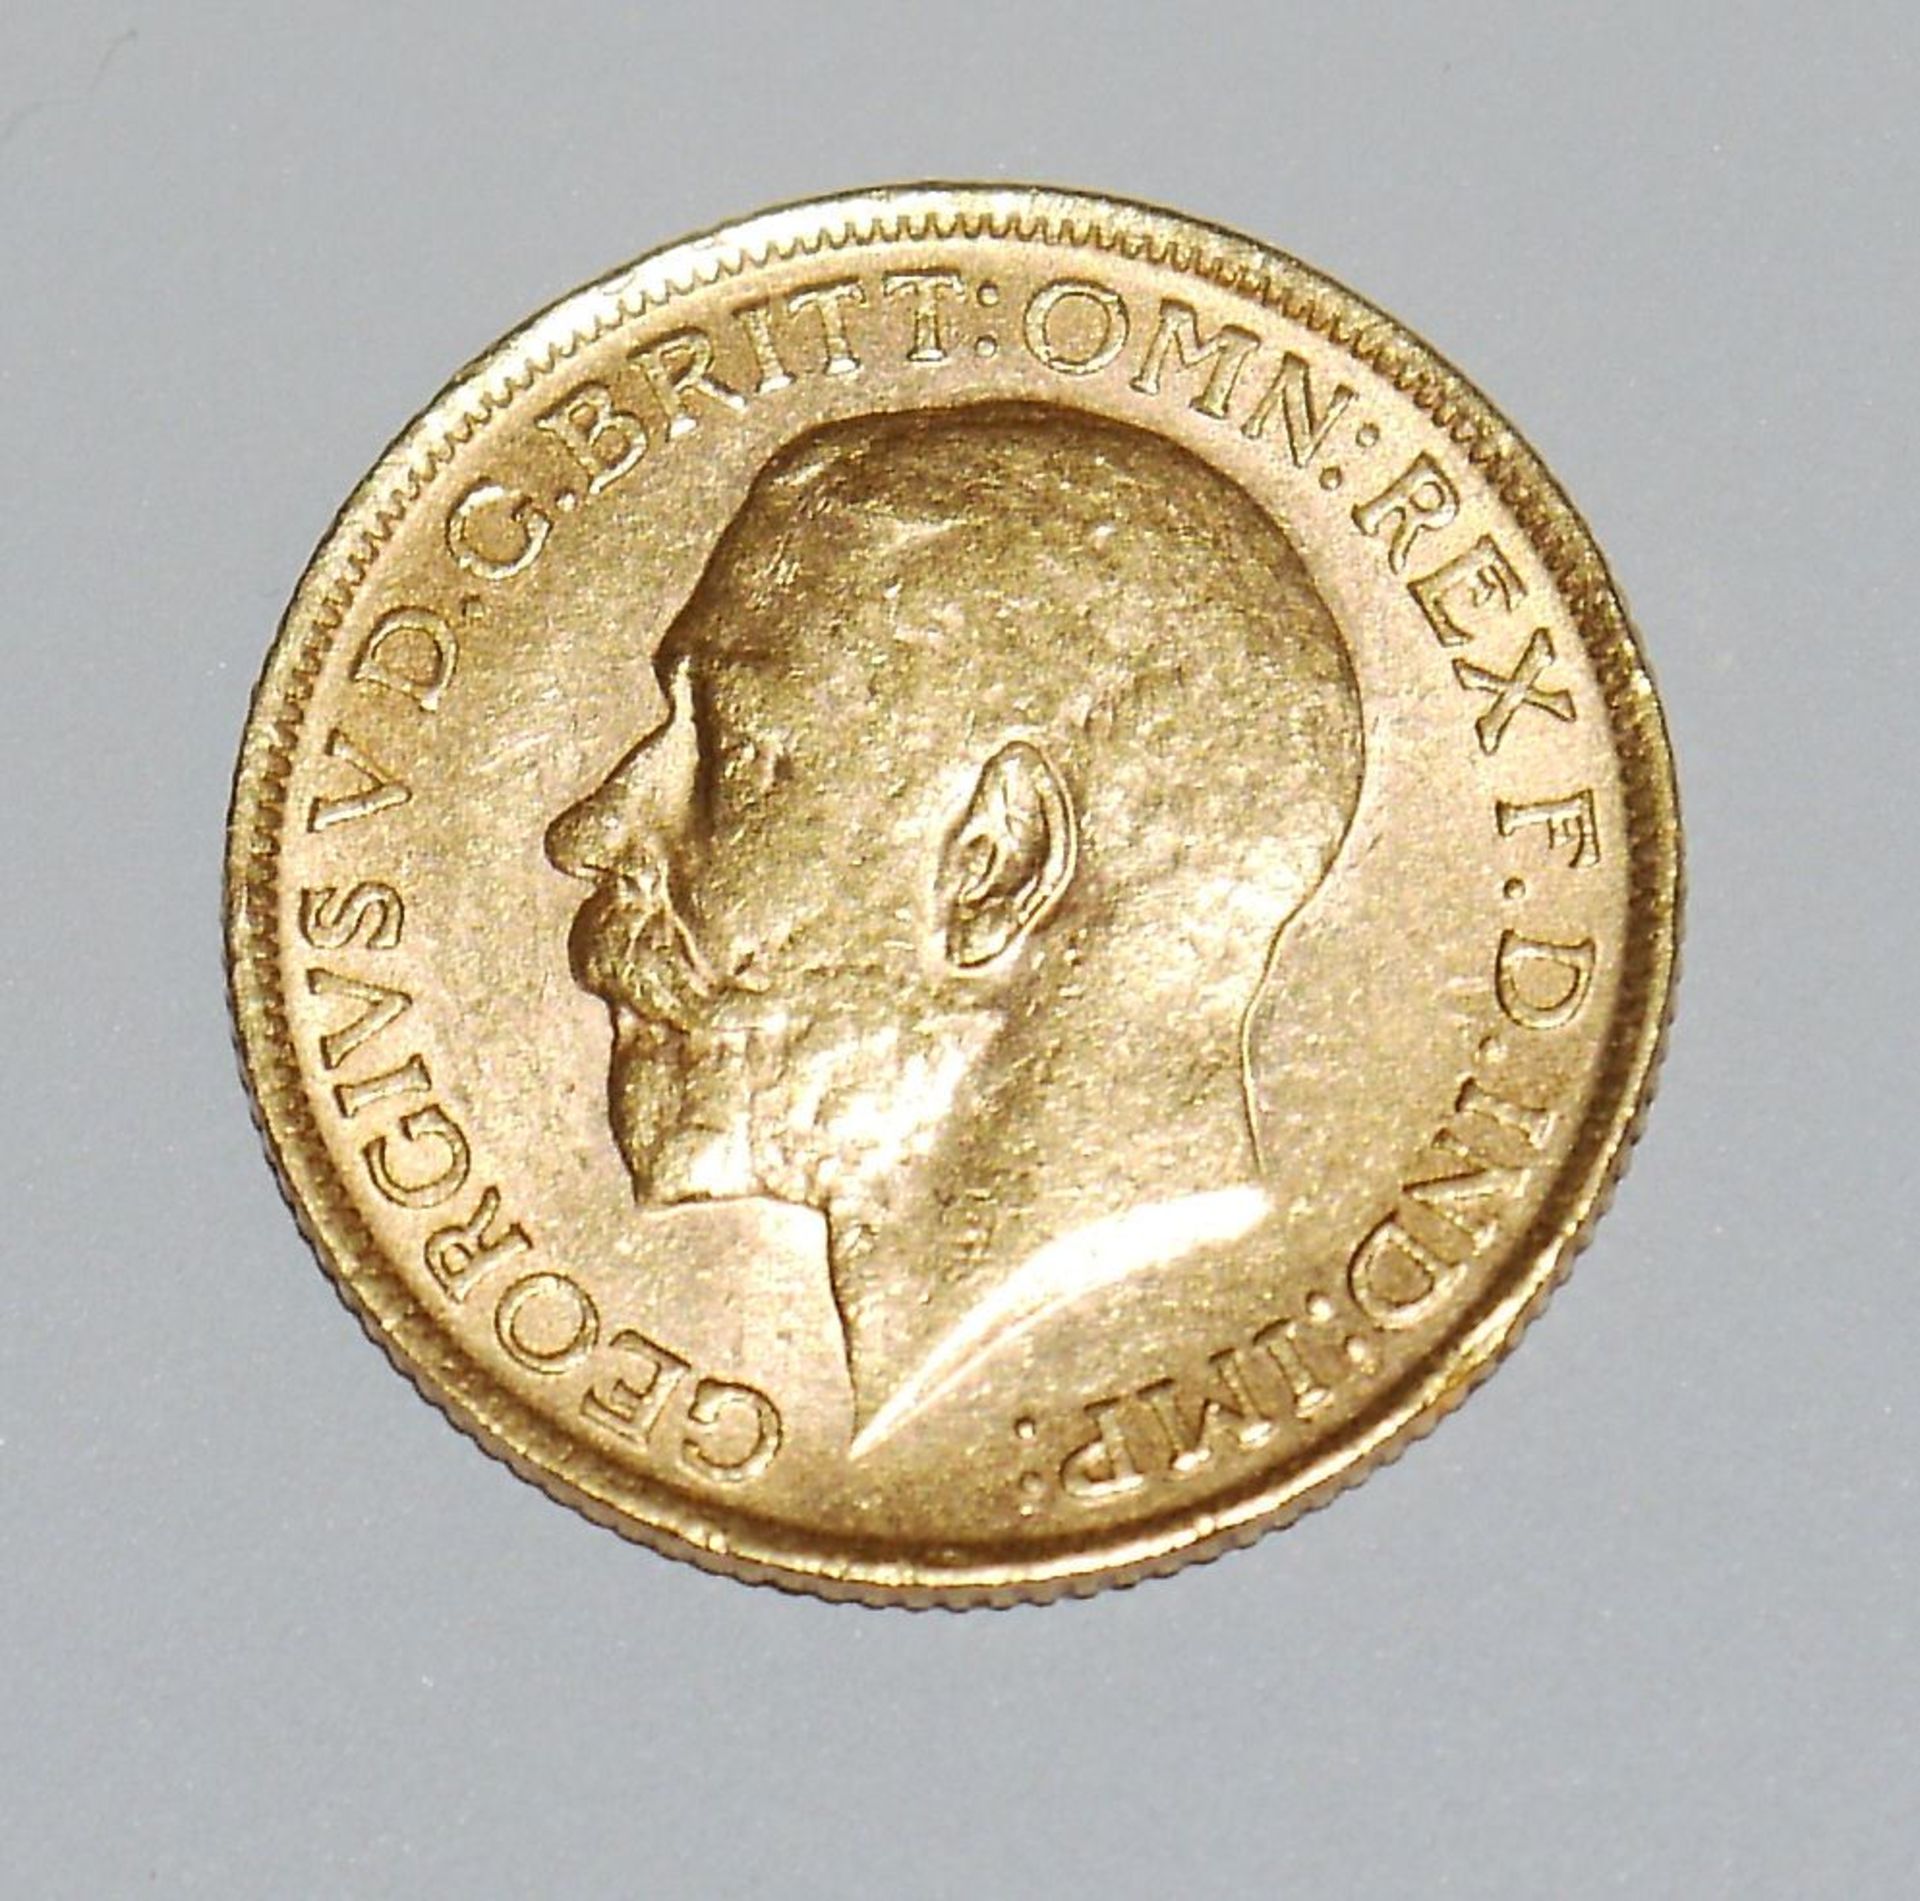 Sovereign George V. Great Britain 1912, gold - Image 2 of 2